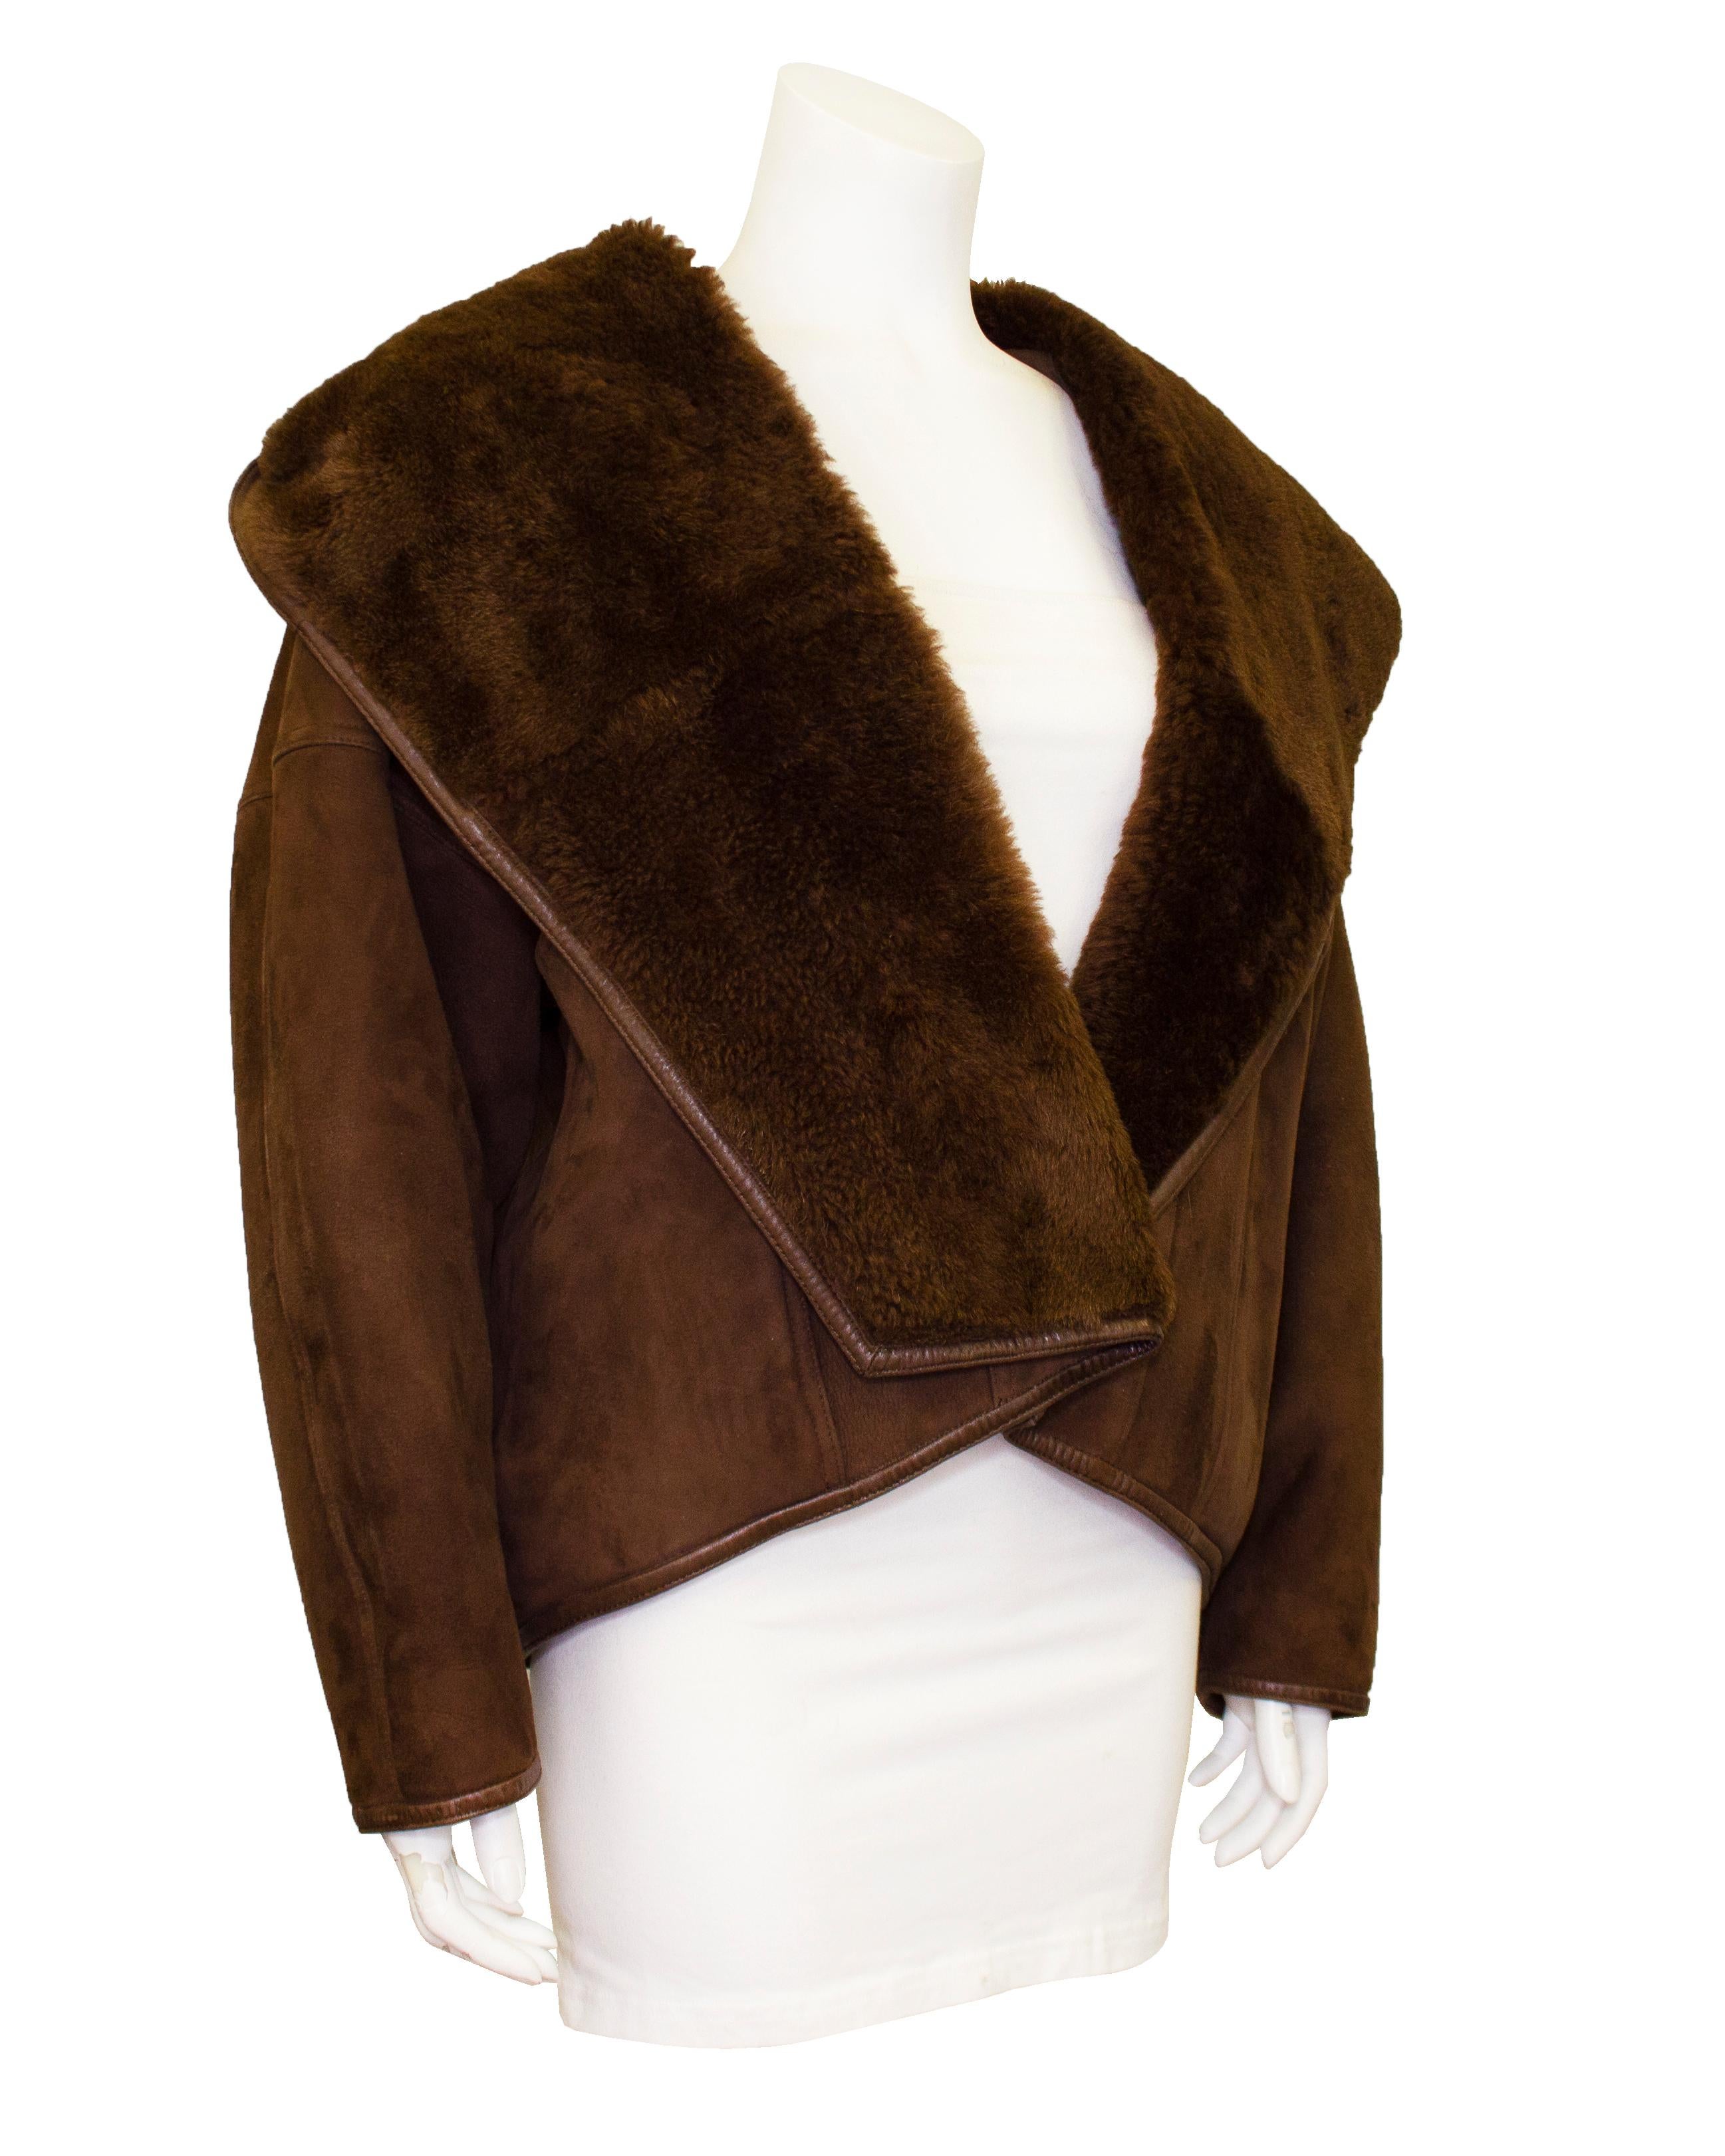 Incredible Genny bomber jacket from the 1980s. Chocolate brown suede outer with shearling interior. Shawl collar that cascades into a large hood and dolman sleeves. Single button closure at hip and oversized open slit pockets. Excellent vintage